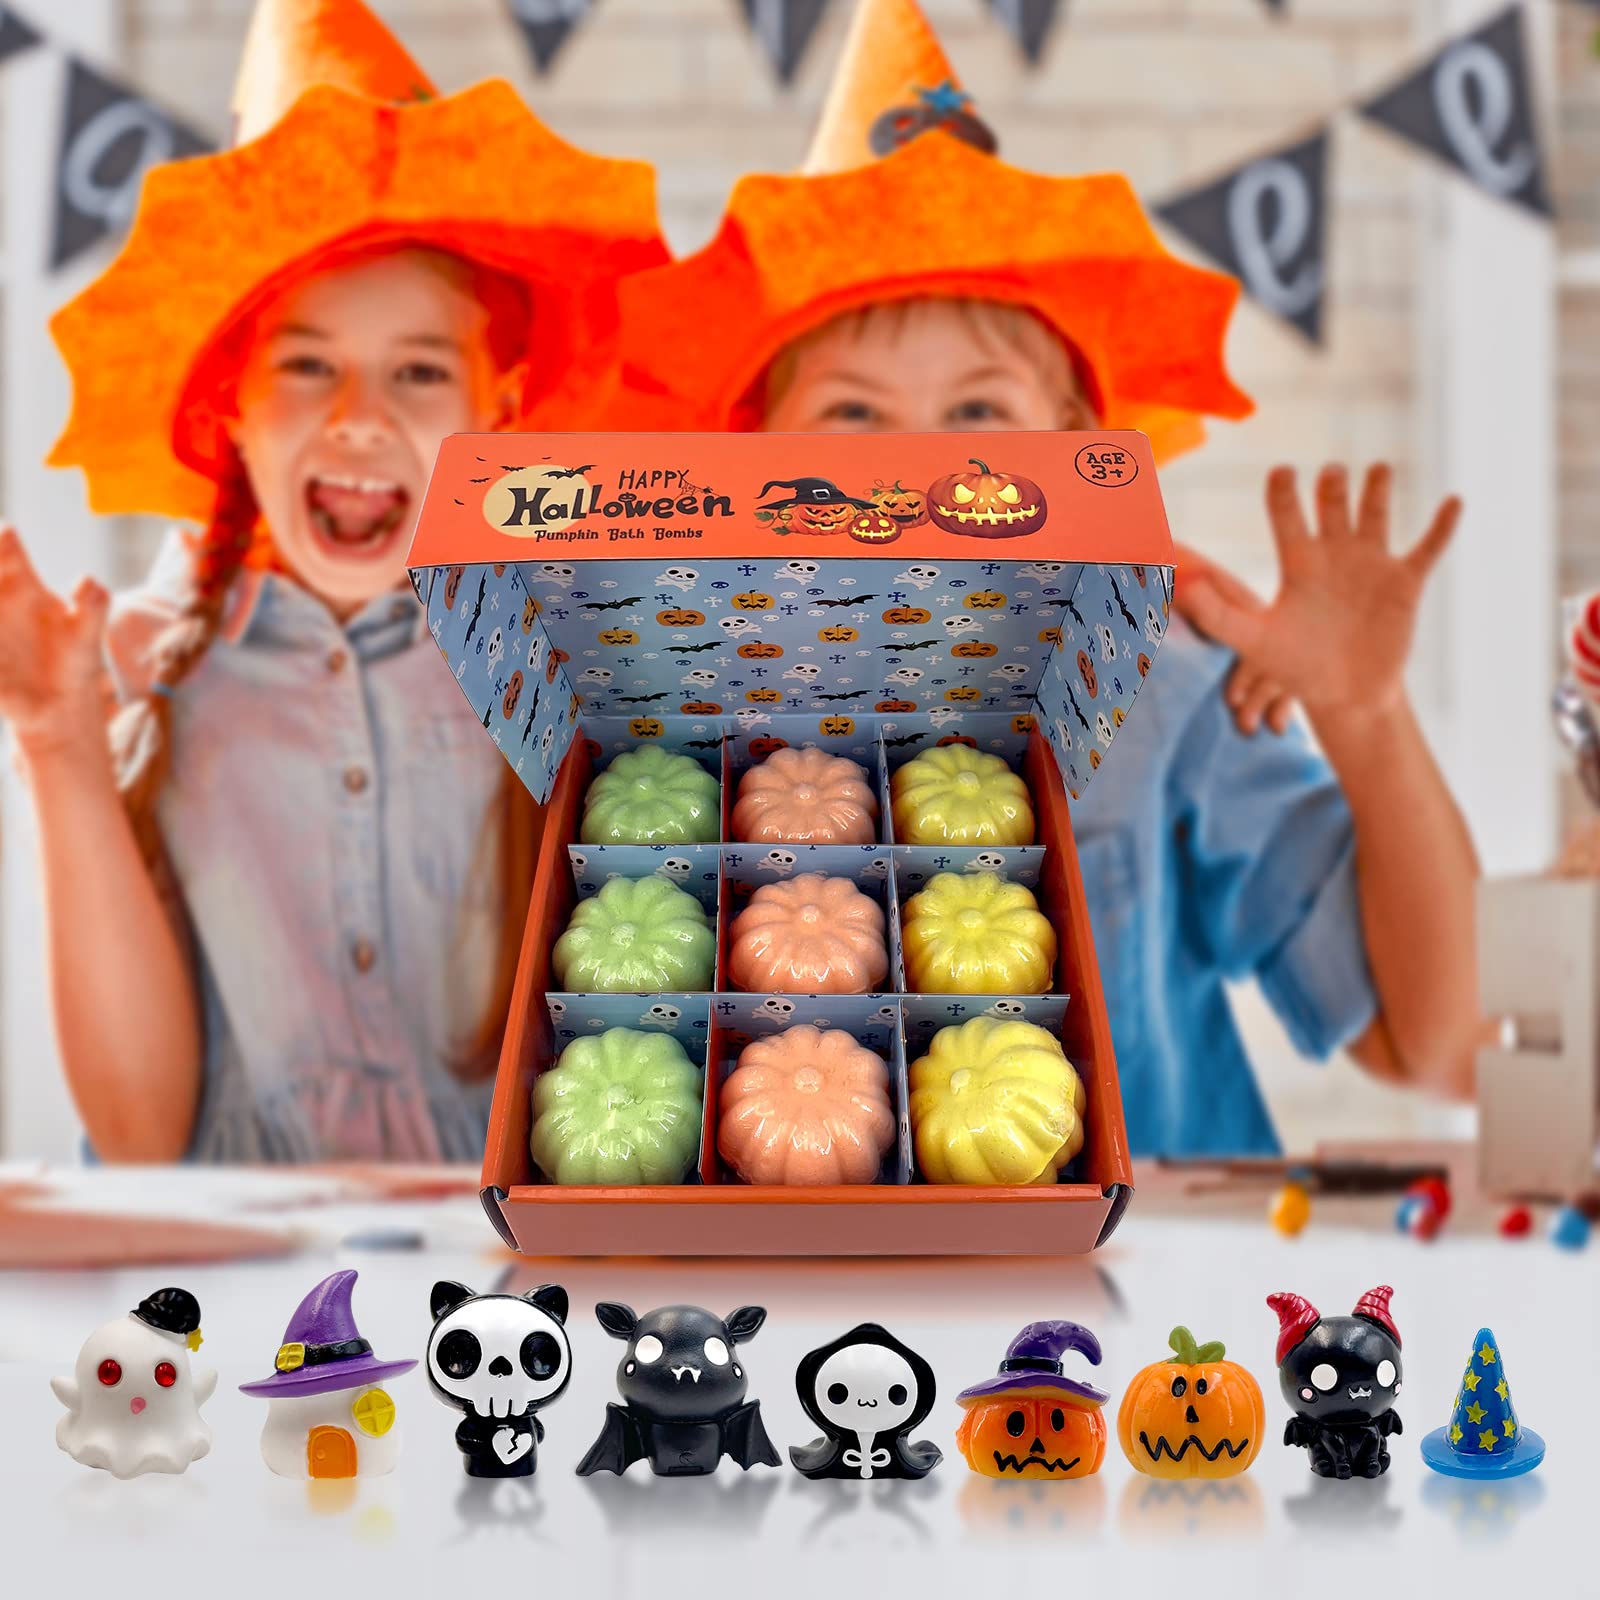 Halloween Bath Bombs with Spooky Toys Inside for Kids, Halloween Party Favors for Kids with Surprise Inside, Hugh Pumpkin Bath Bombs for Kids with Surprise Inside,